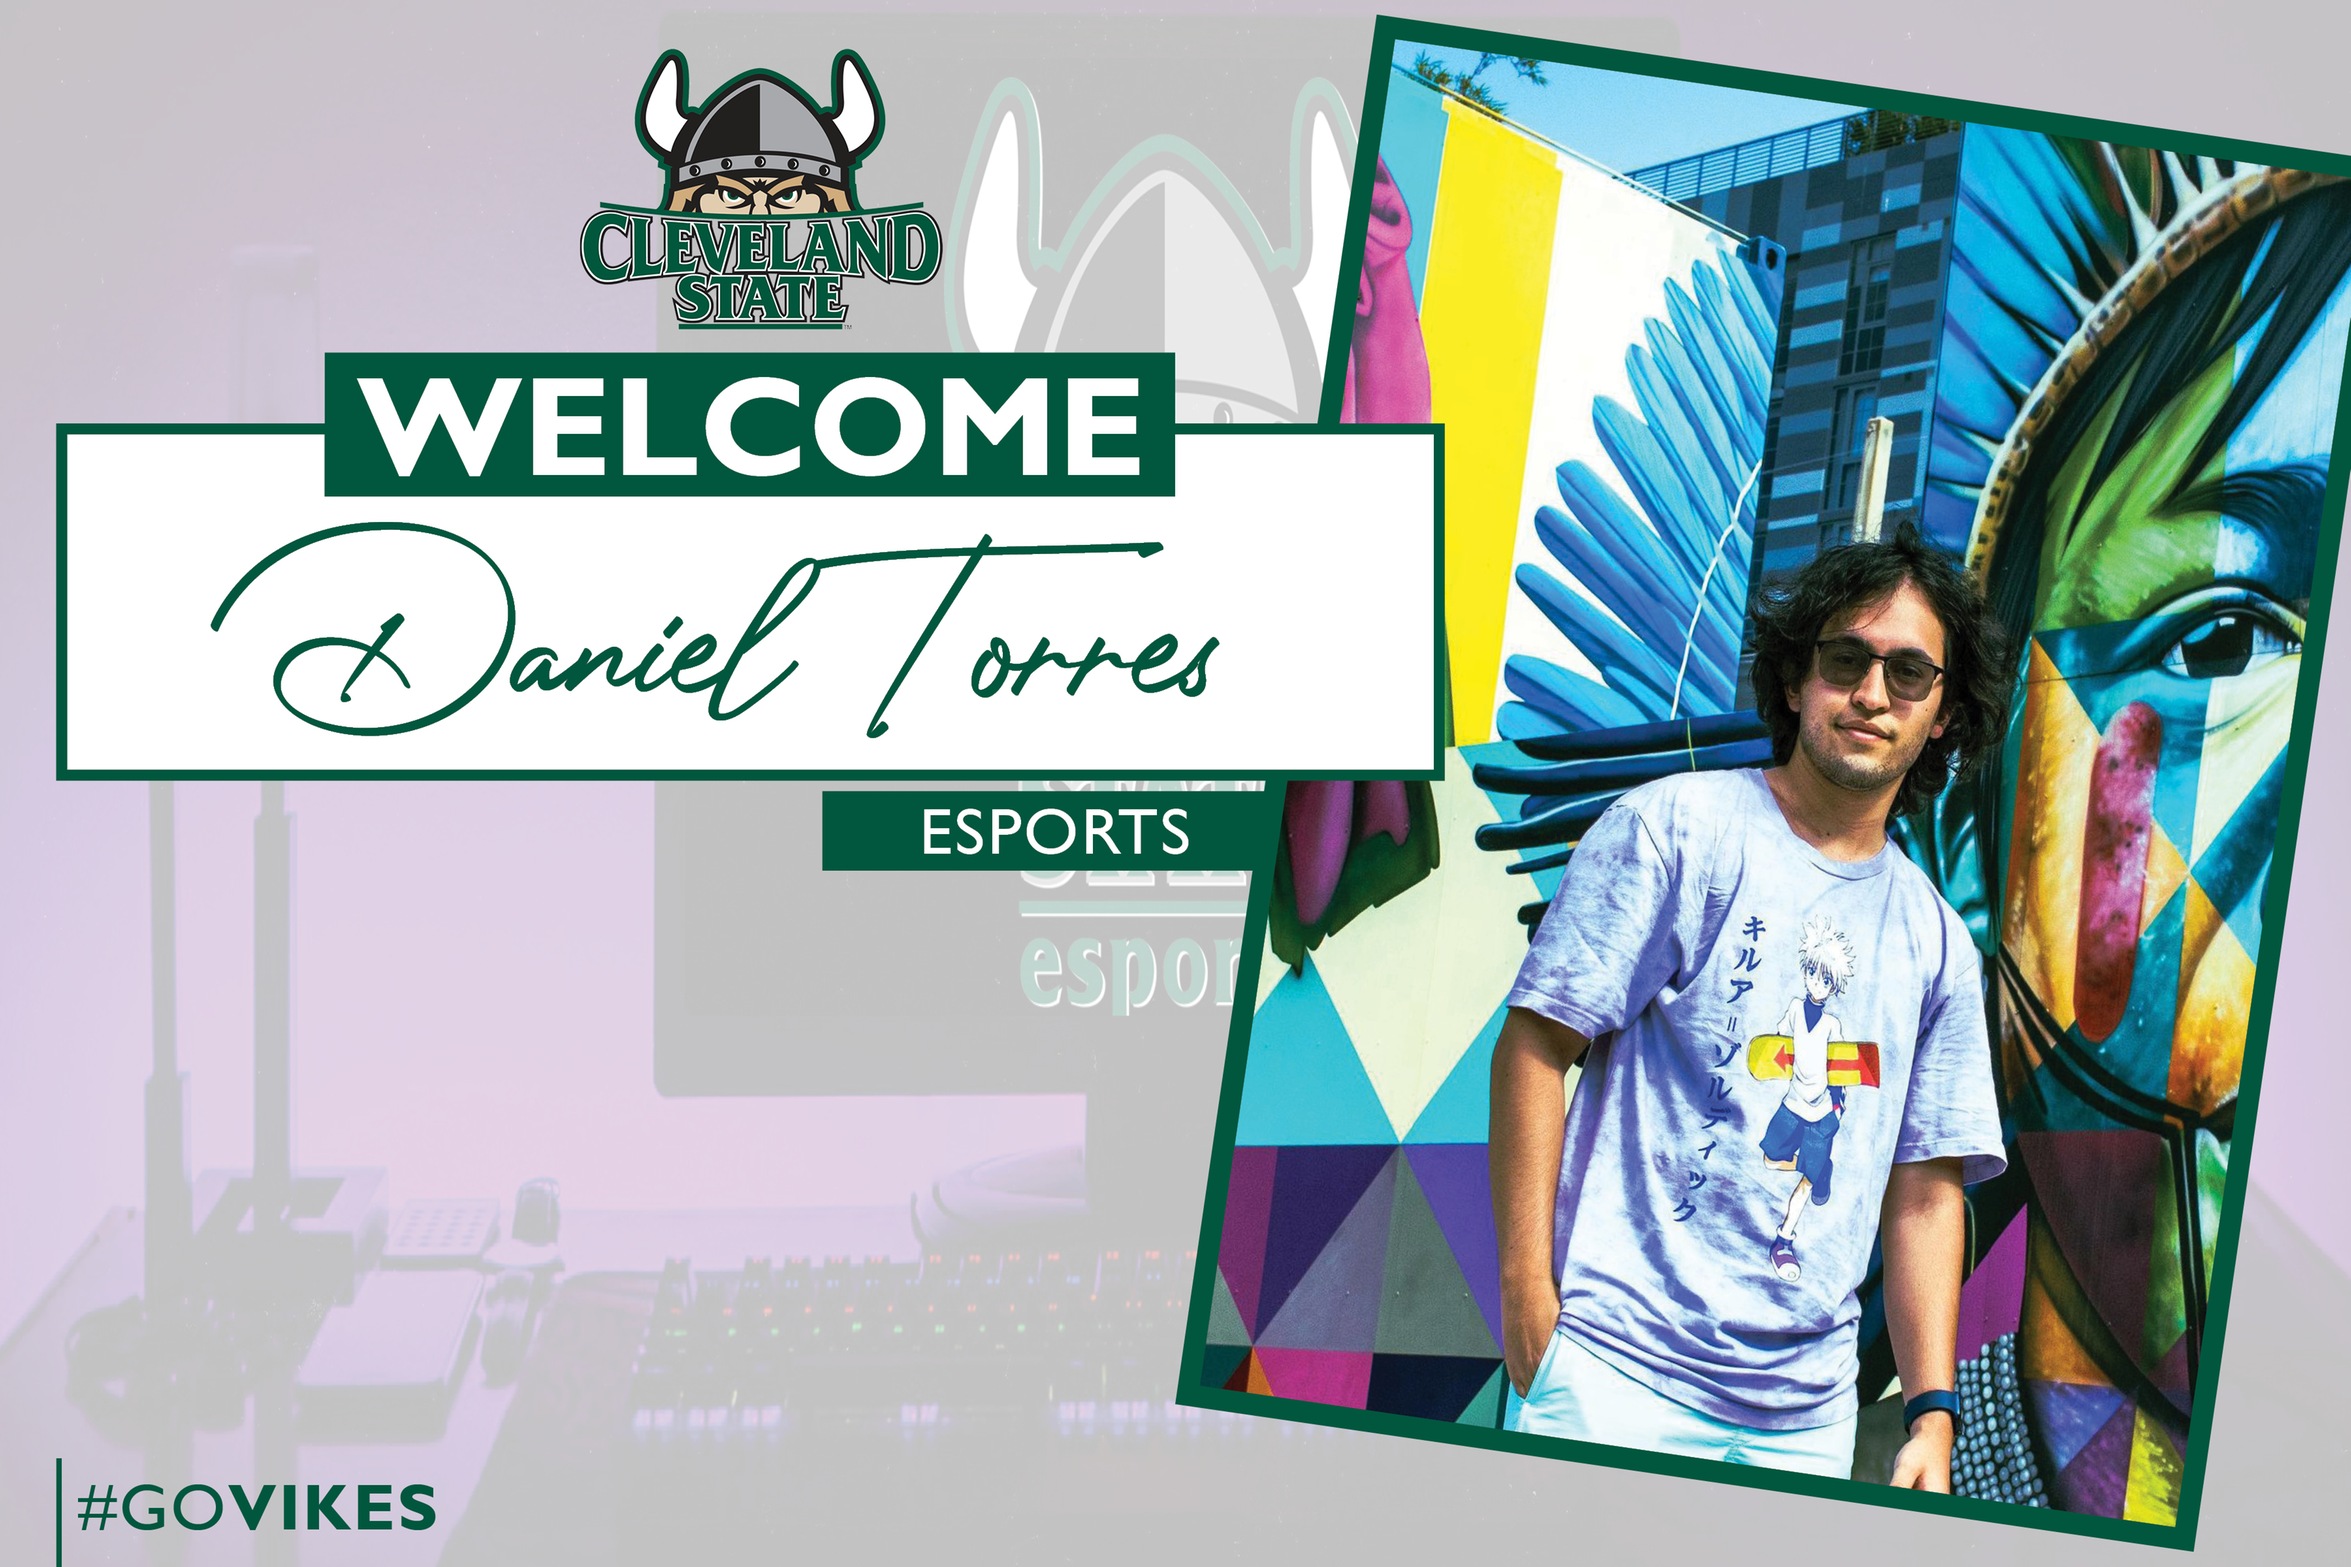 Cleveland State Welcomes Daniel Torres